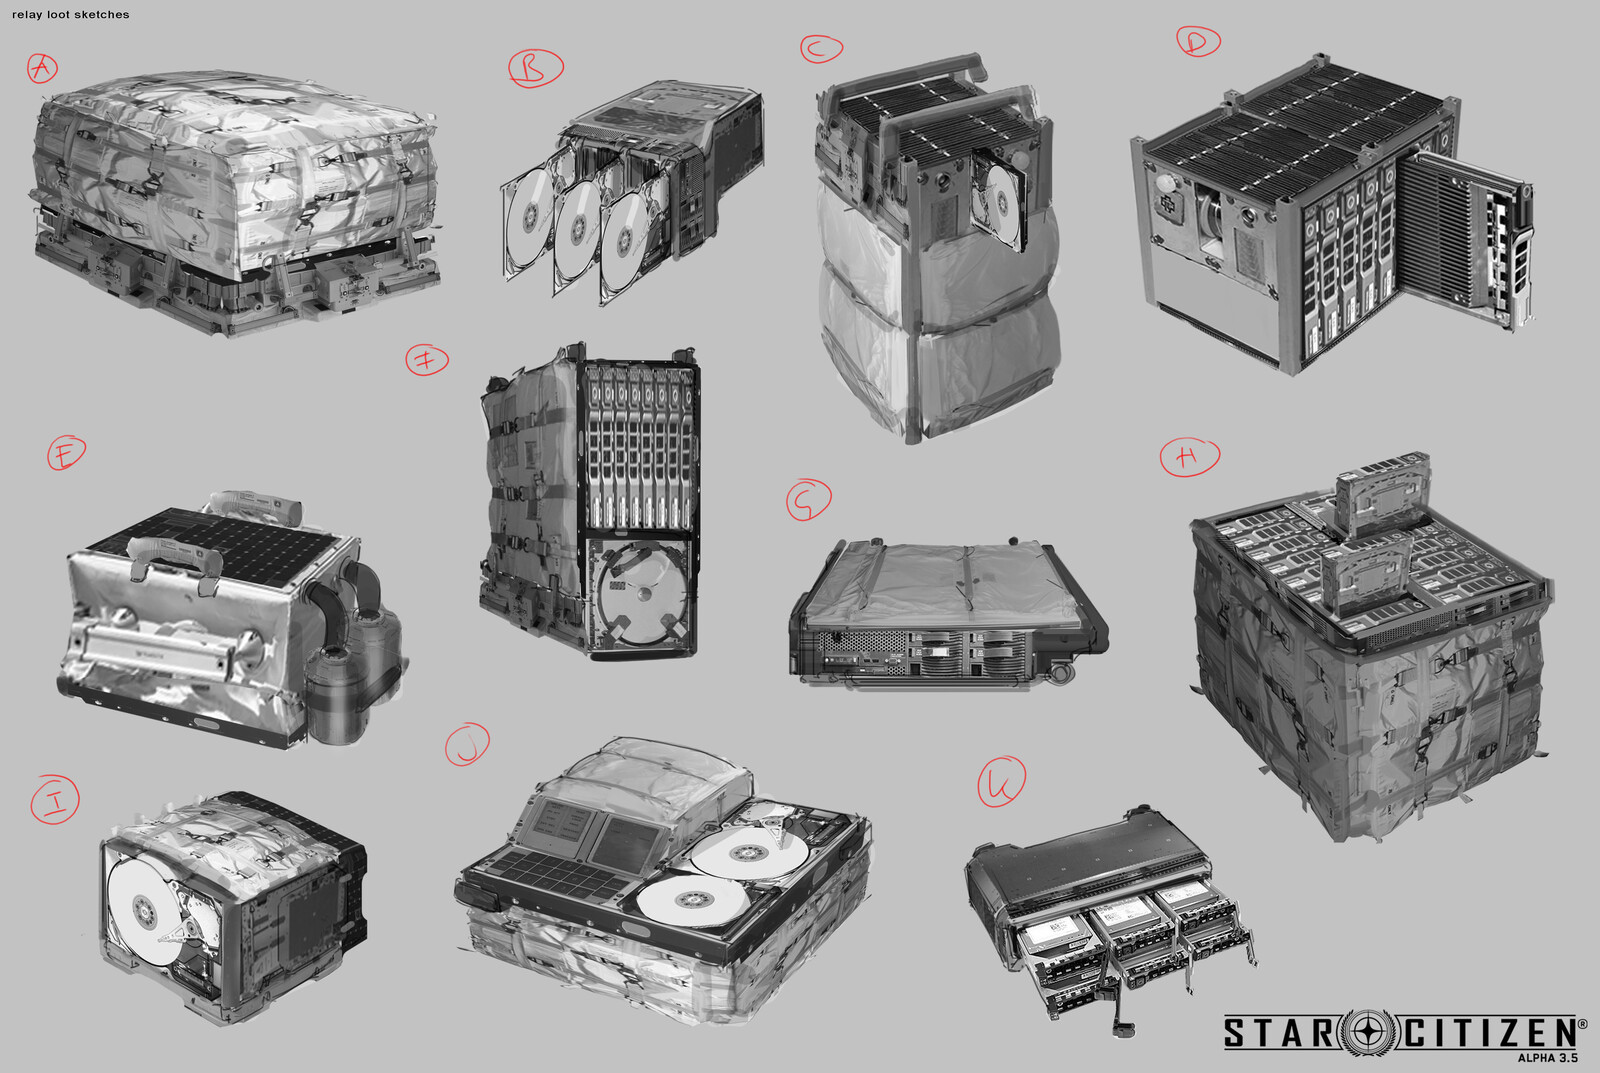 loot sketches